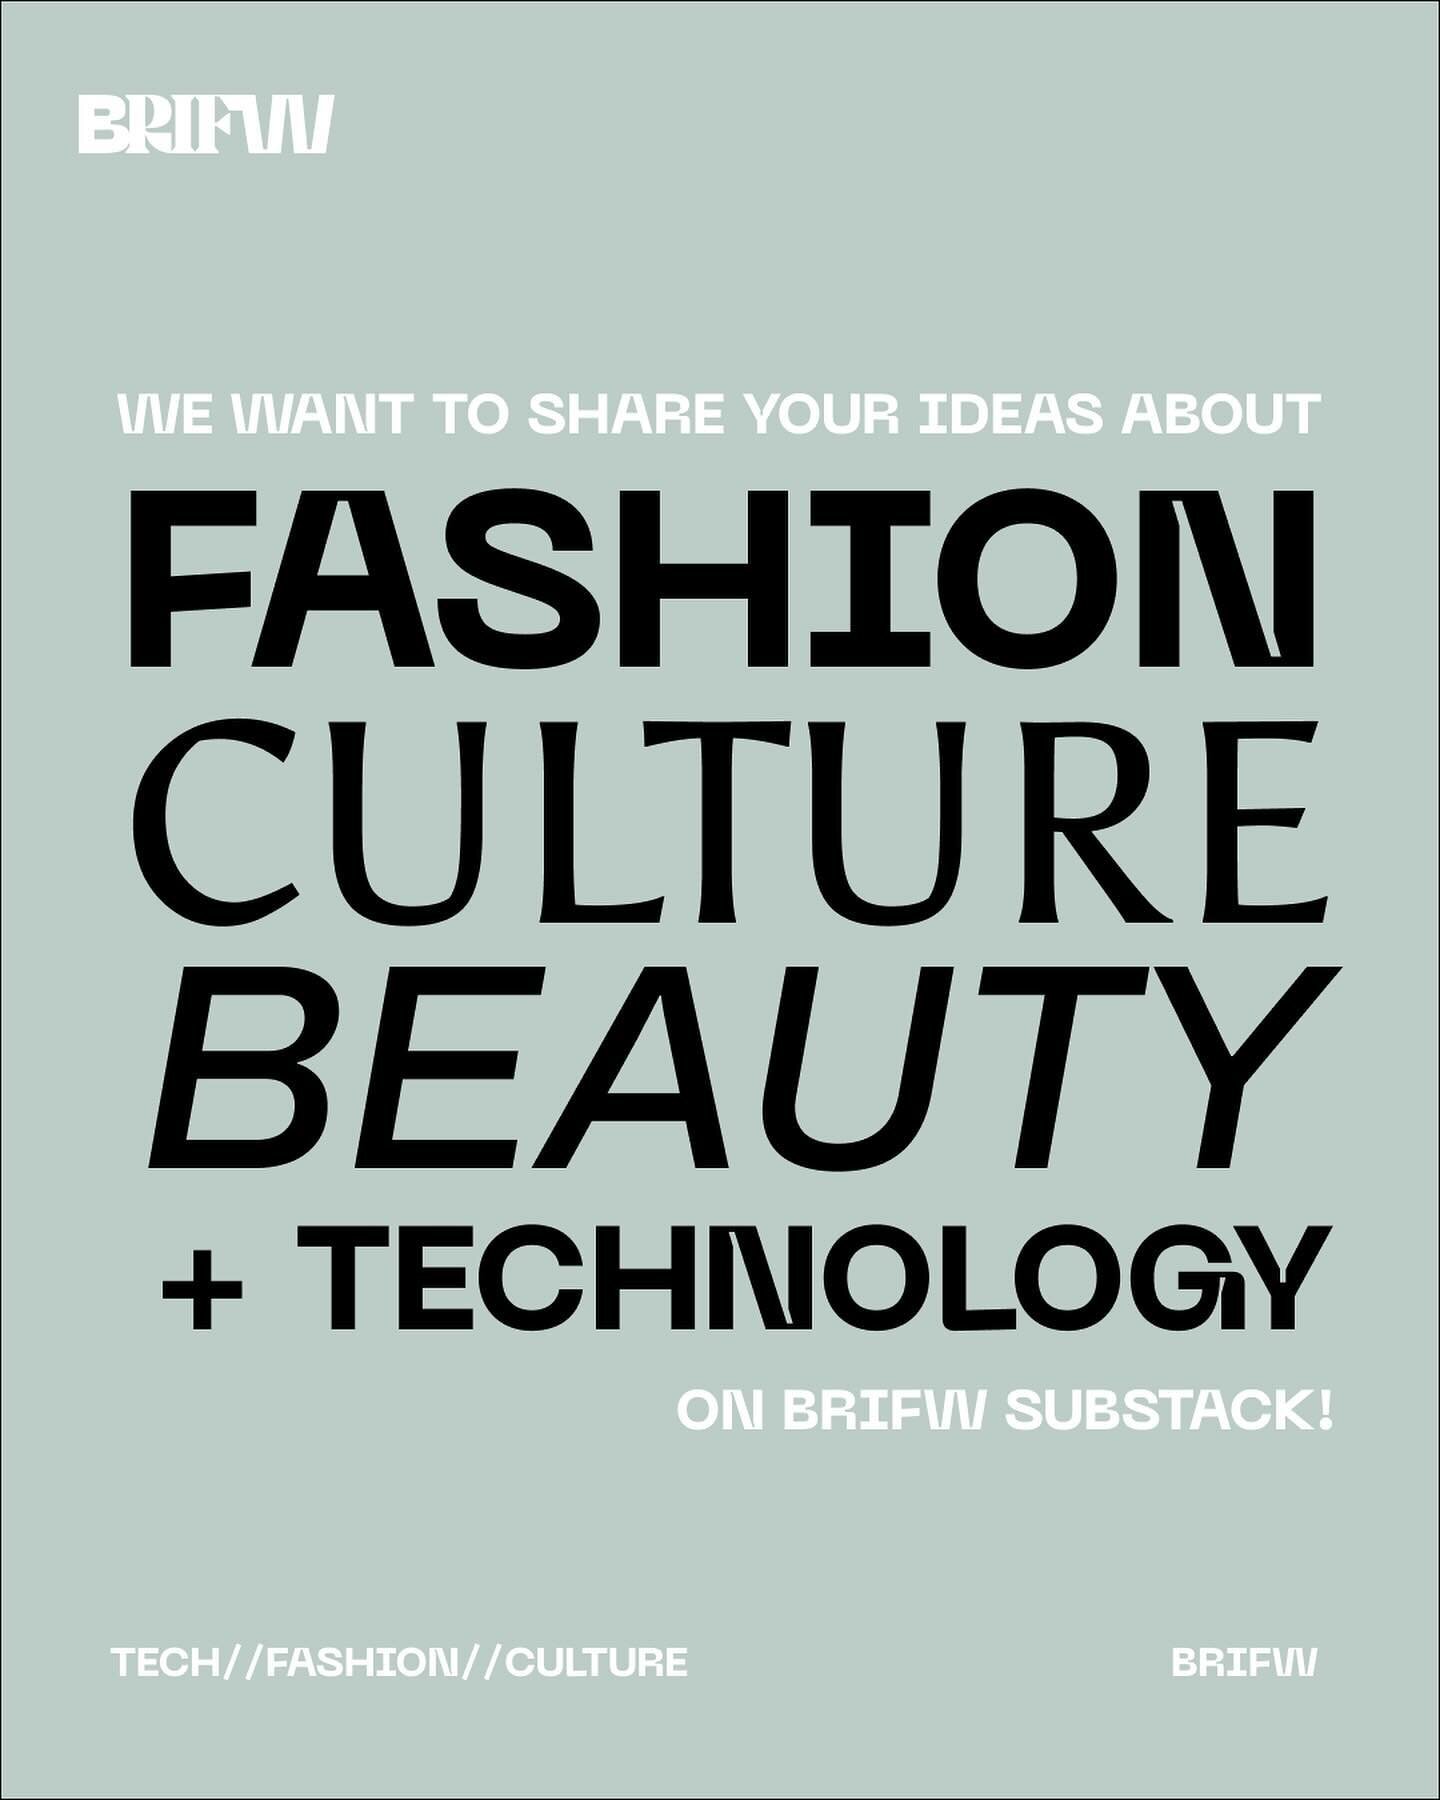 We want to share your point of view on technology, fashion, beauty and culture on the BRIFW Substack! 👾

If you write or create content about technology and culture, like to discuss the future and transformations in the areas of fashion and art and 